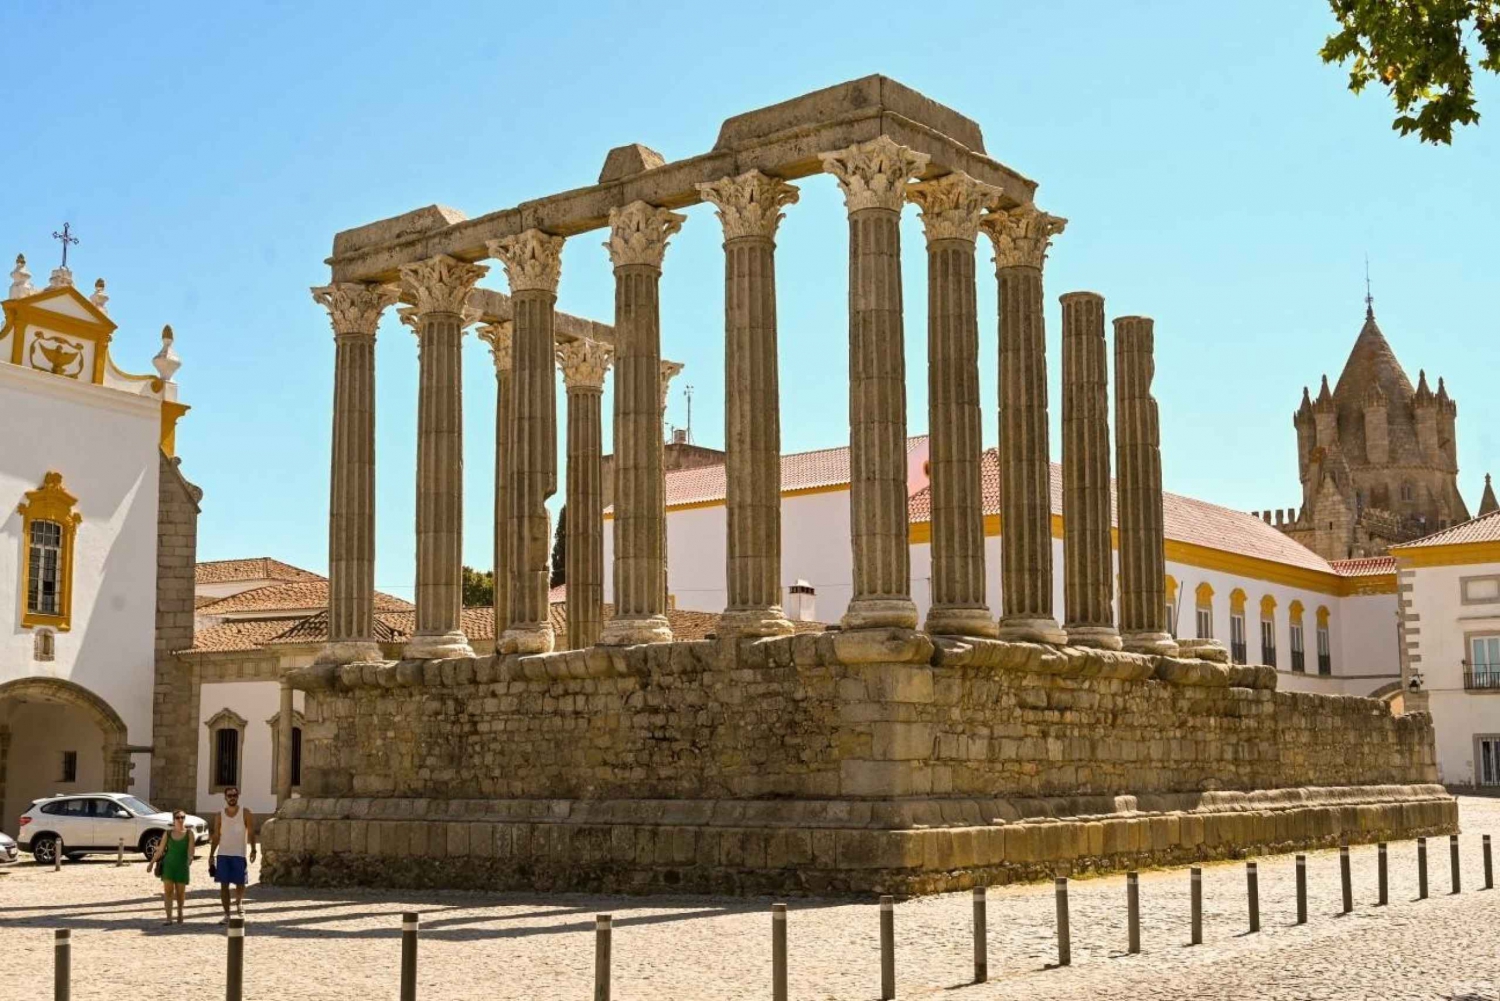 Lisbon: To Algarve, stop in Évora, or any city along the way